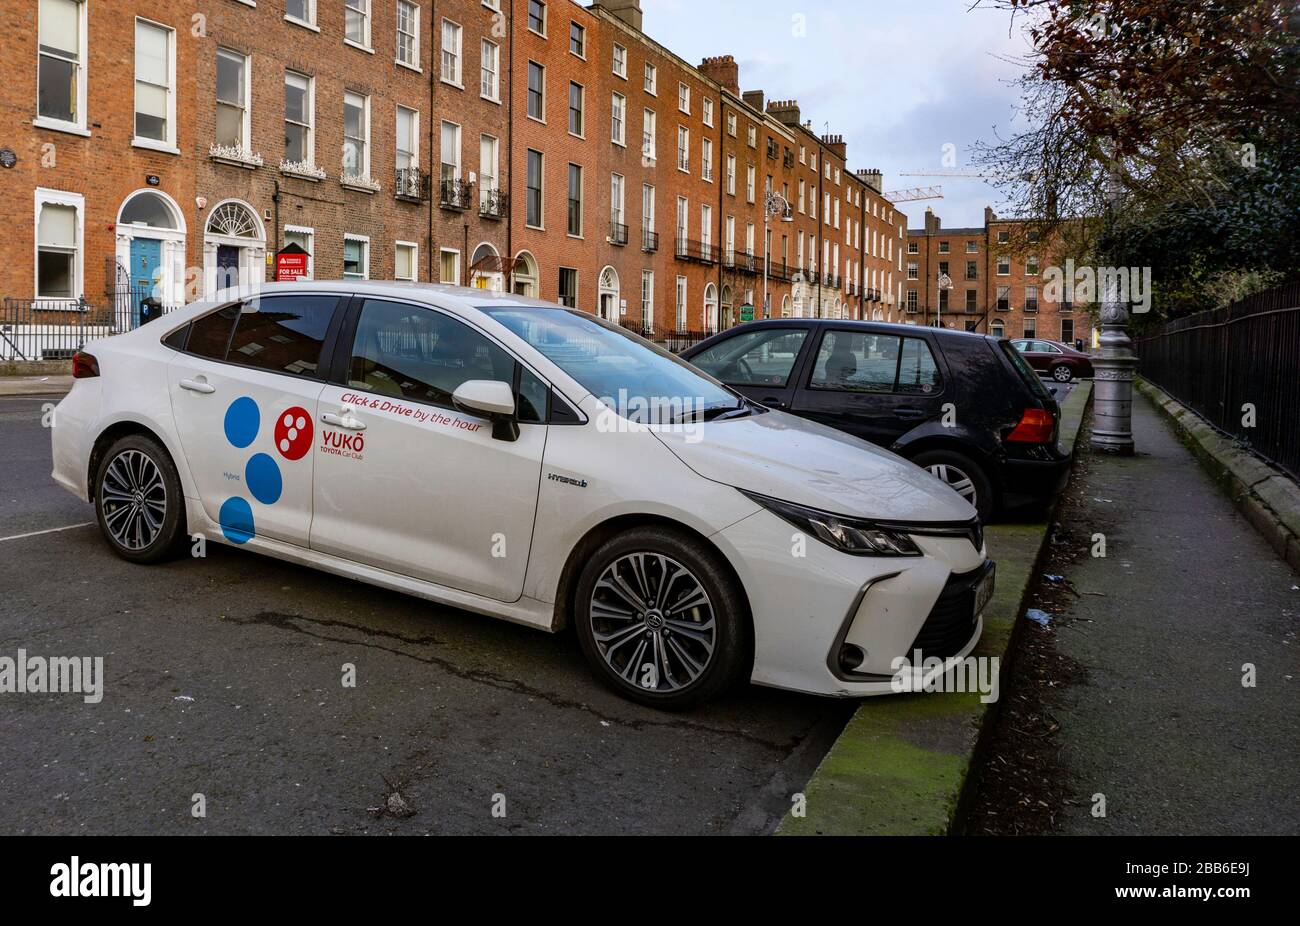 A YUKO short term rental car in Fitzwilliam Square, Dublin, Ireland. YUKO is part of  Toyota's Car Club .Users pay by the hour. Stock Photo